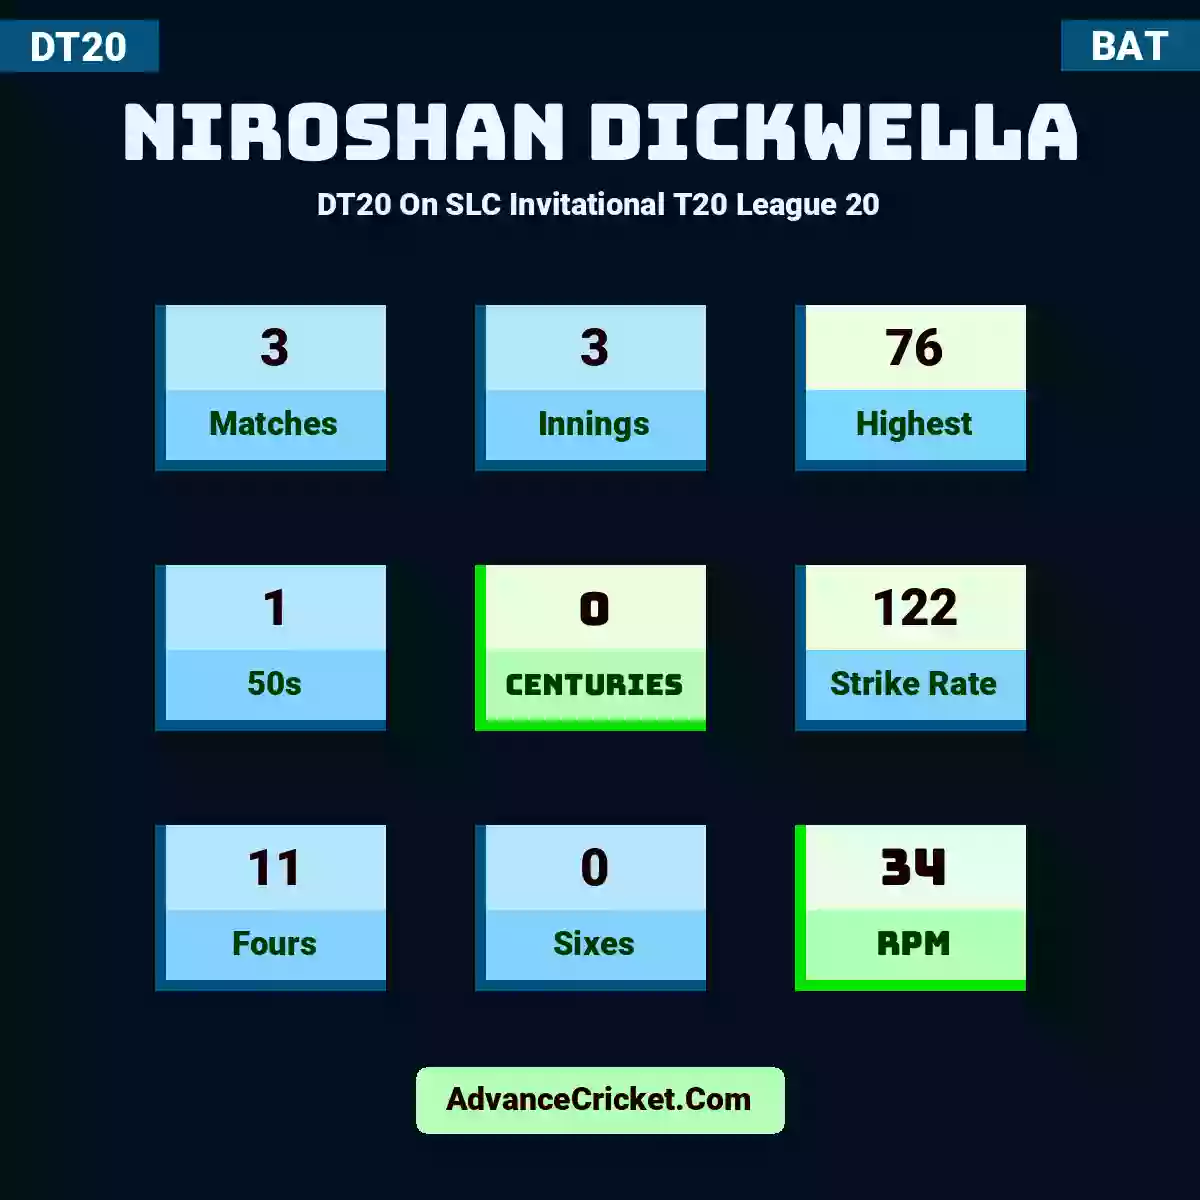 Niroshan Dickwella DT20  On SLC Invitational T20 League 20, Niroshan Dickwella played 3 matches, scored 76 runs as highest, 1 half-centuries, and 0 centuries, with a strike rate of 122. N.Dickwella hit 11 fours and 0 sixes, with an RPM of 34.